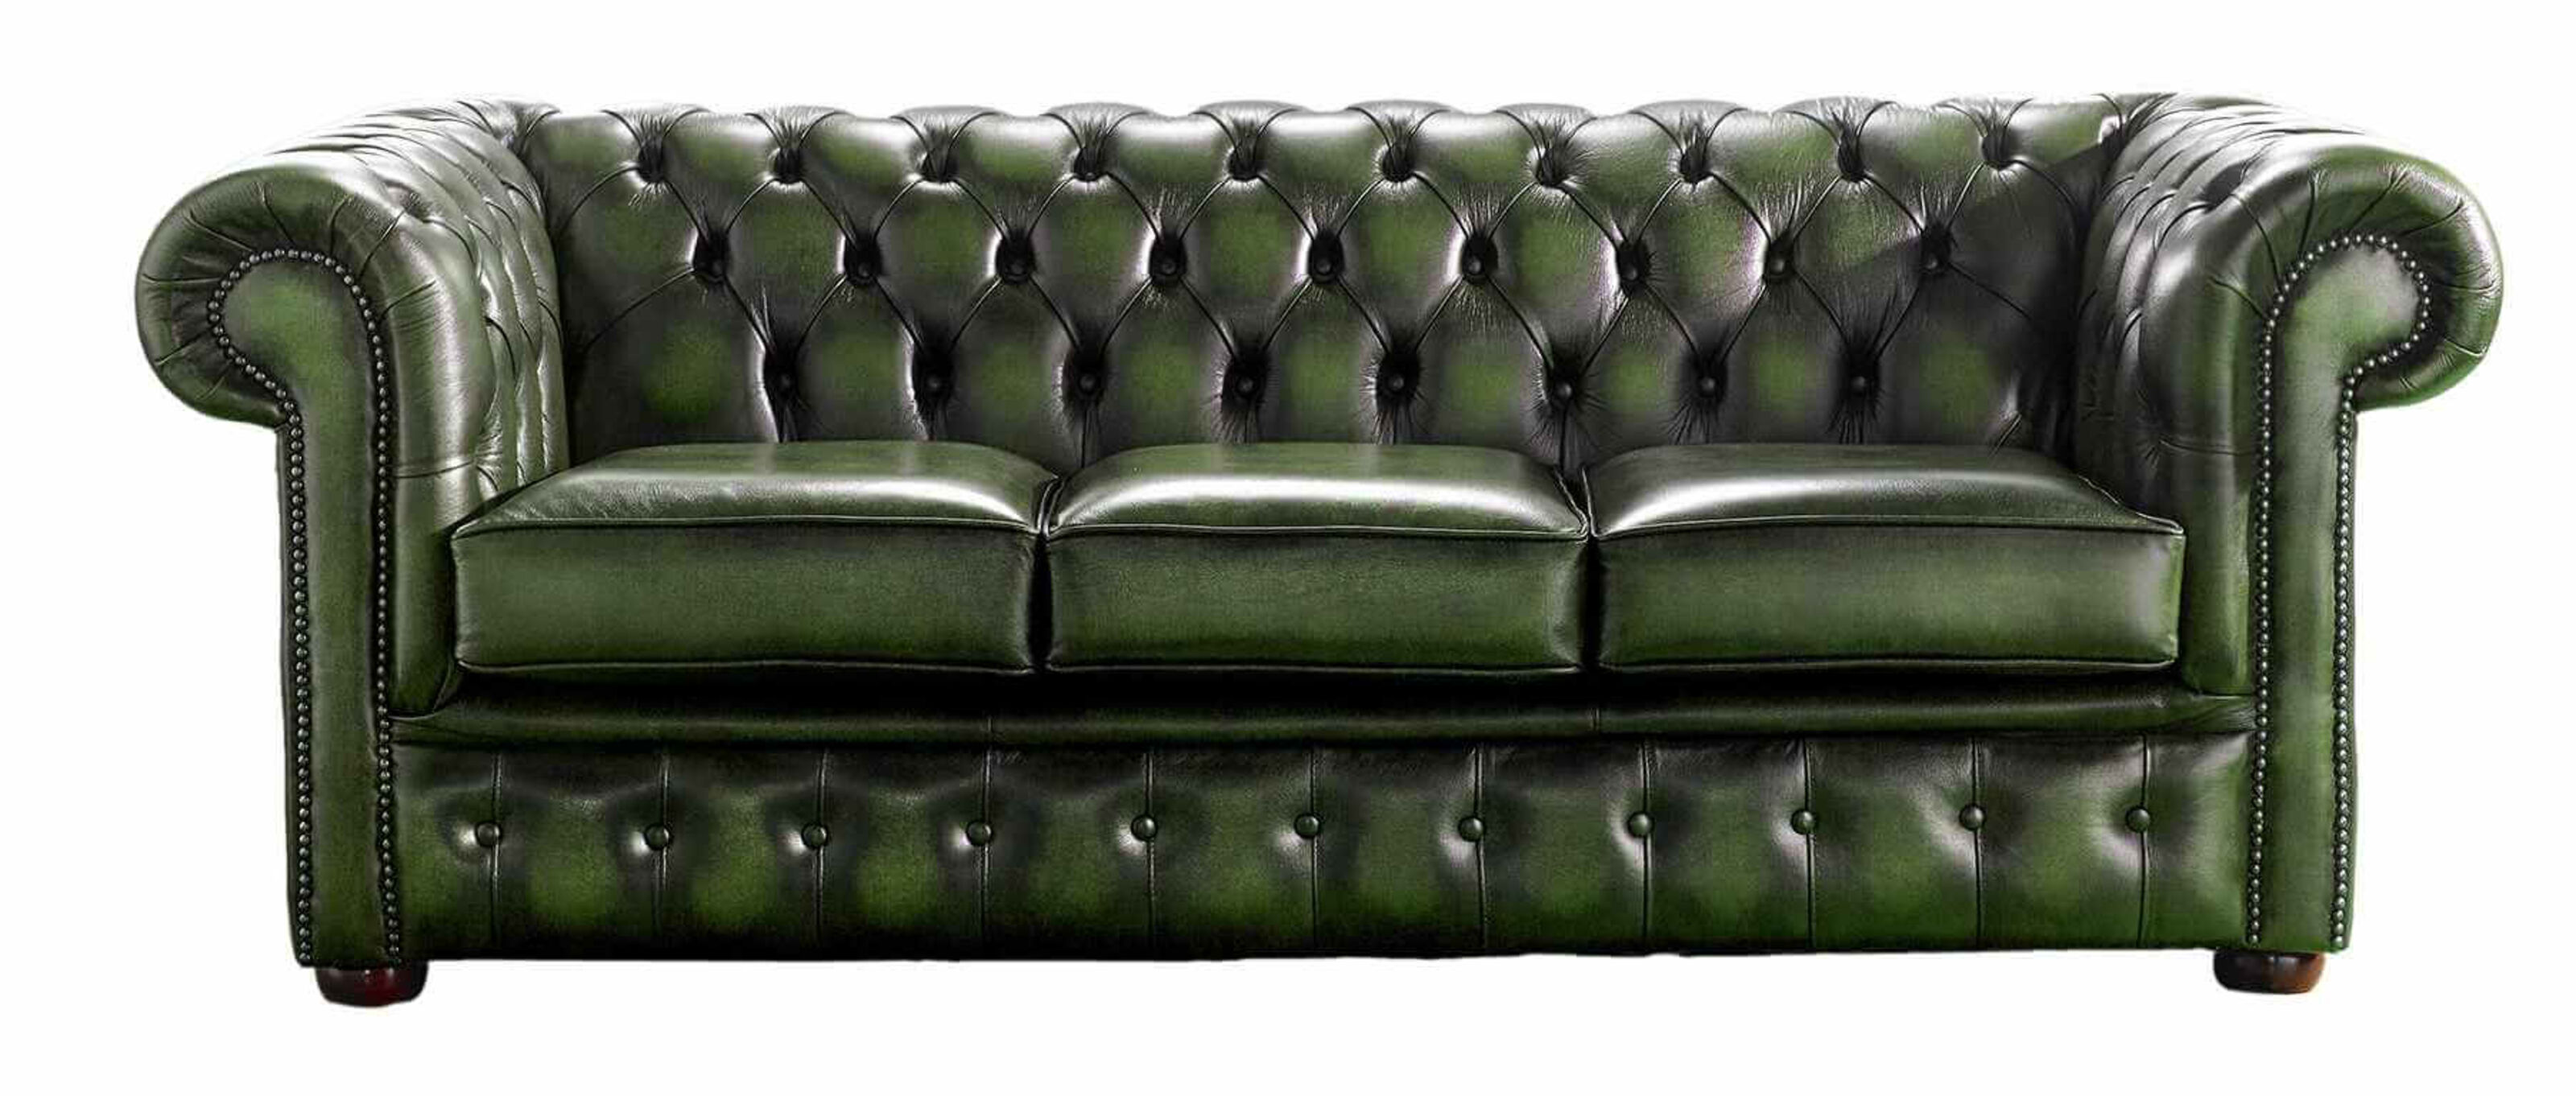 Sofa Styling Innovative Design Concepts for Chesterfield Sofas  %Post Title